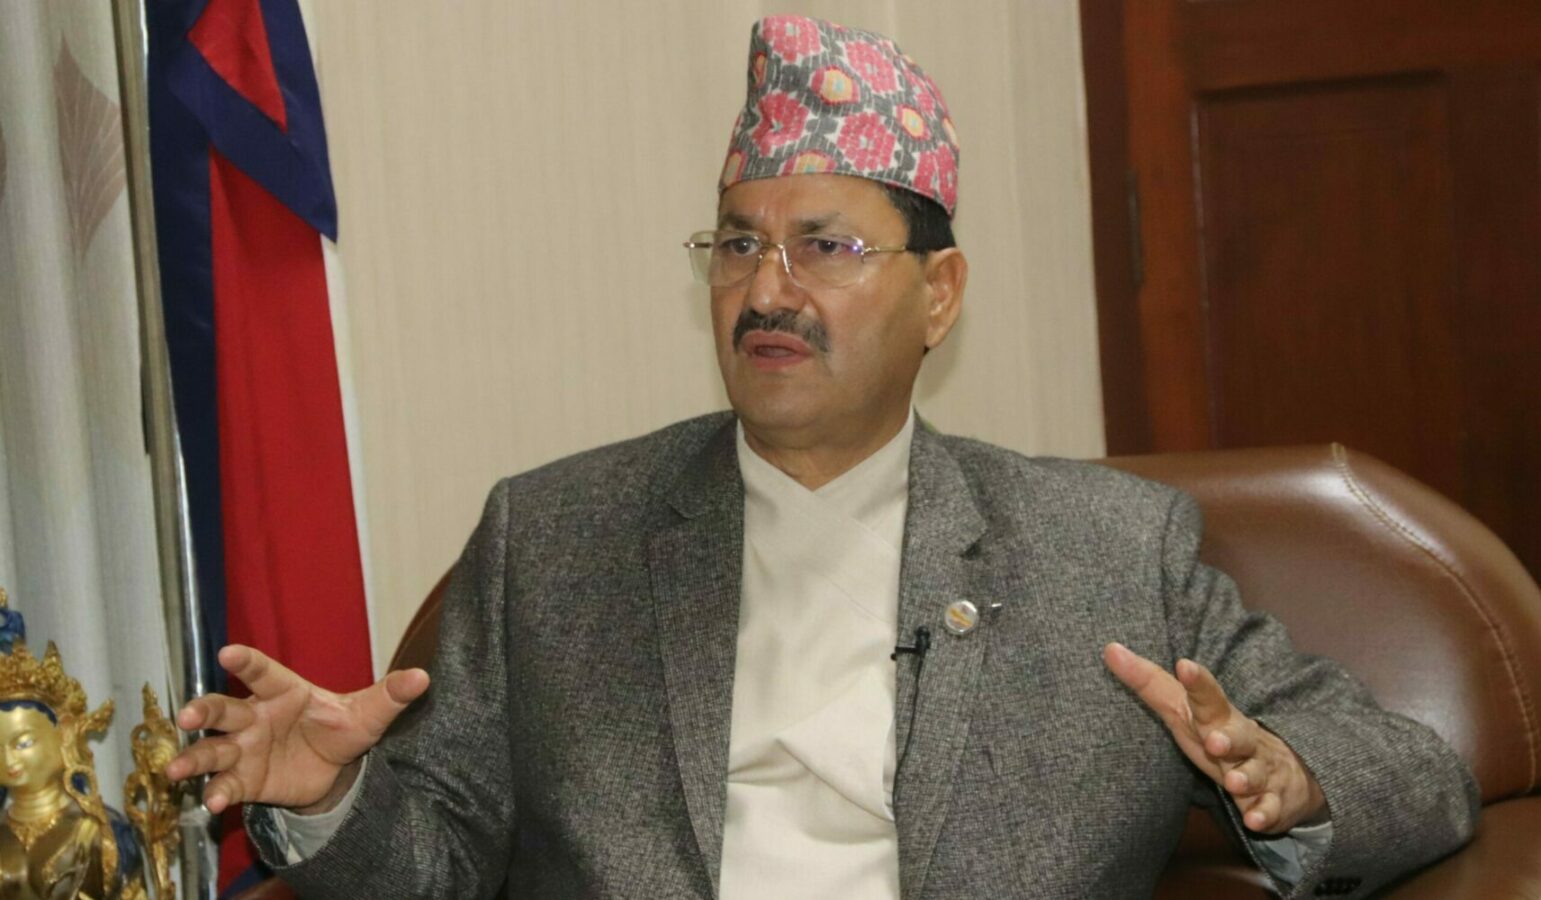 Nepal reiterates its commitment to disarmament and global peace